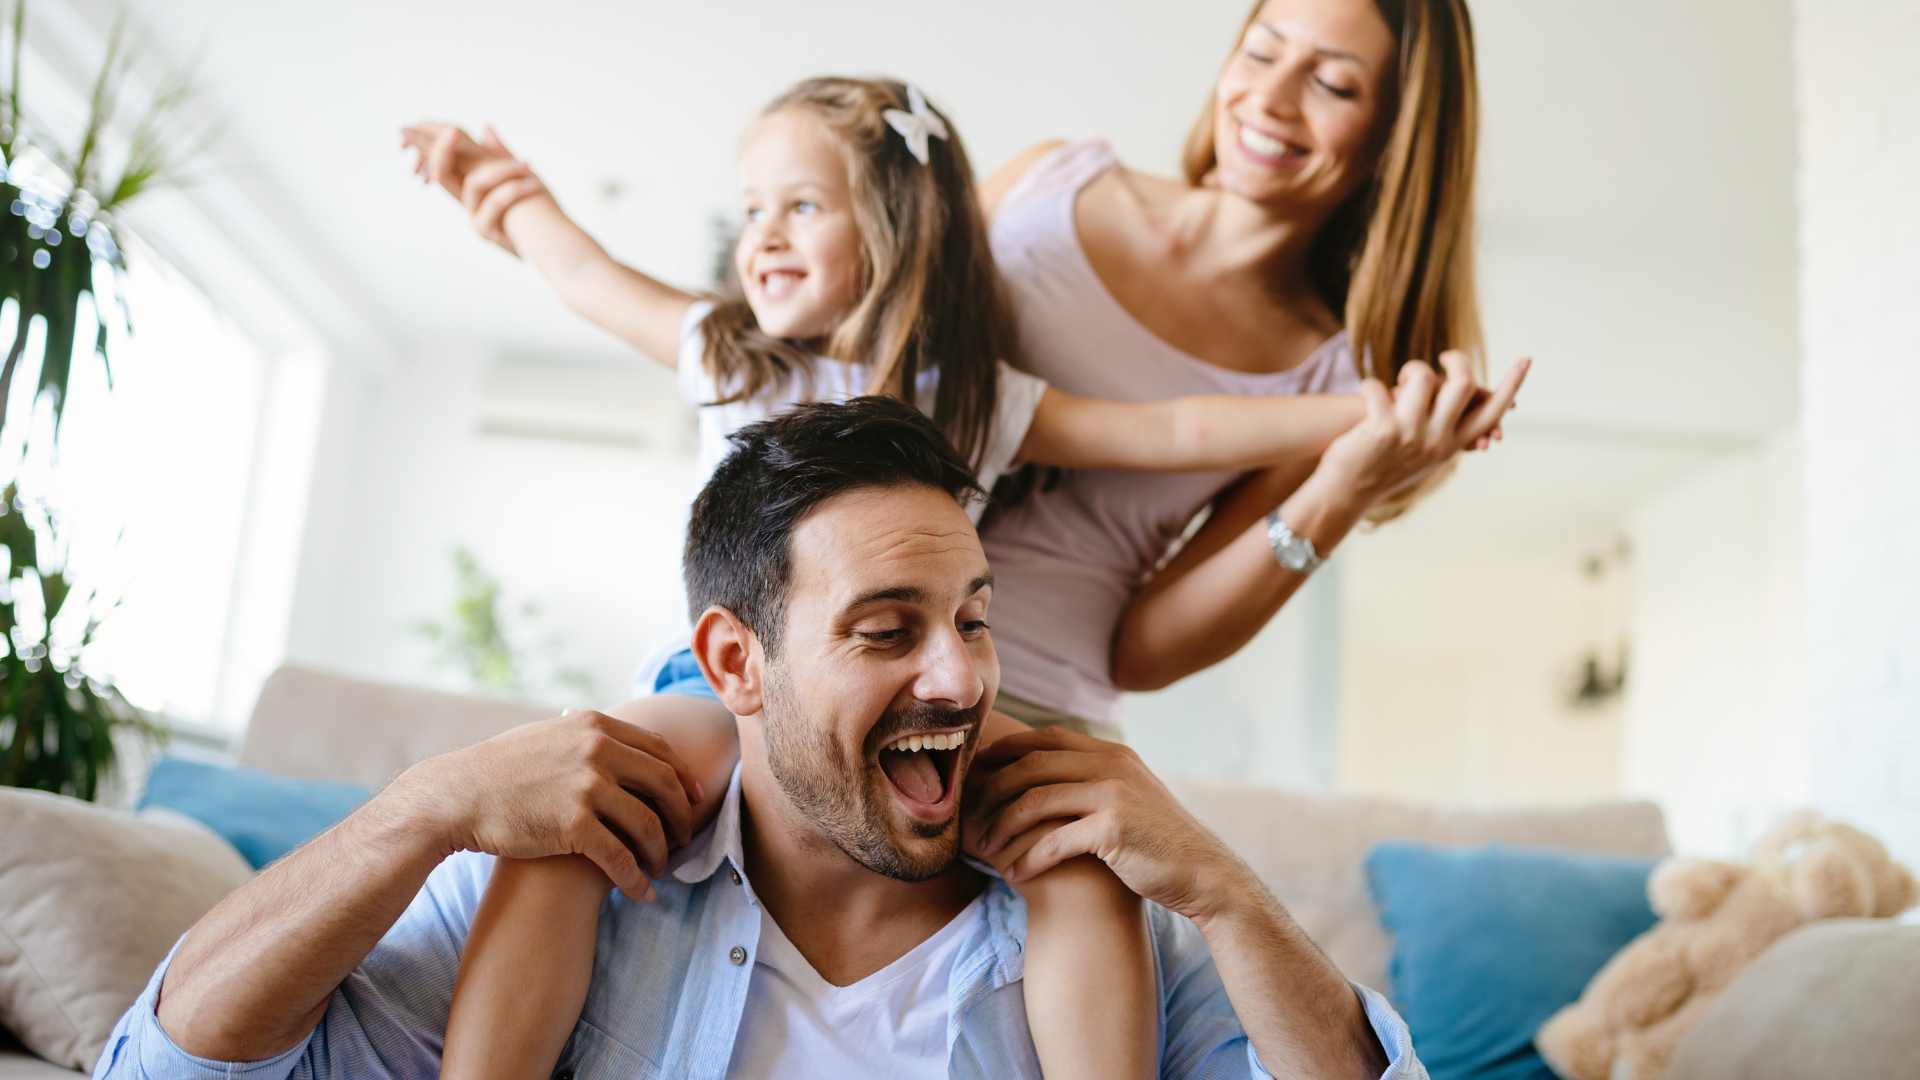 6 step guide to property investment portfolio success unlocking maximum returns image 3 - a happy family at home together